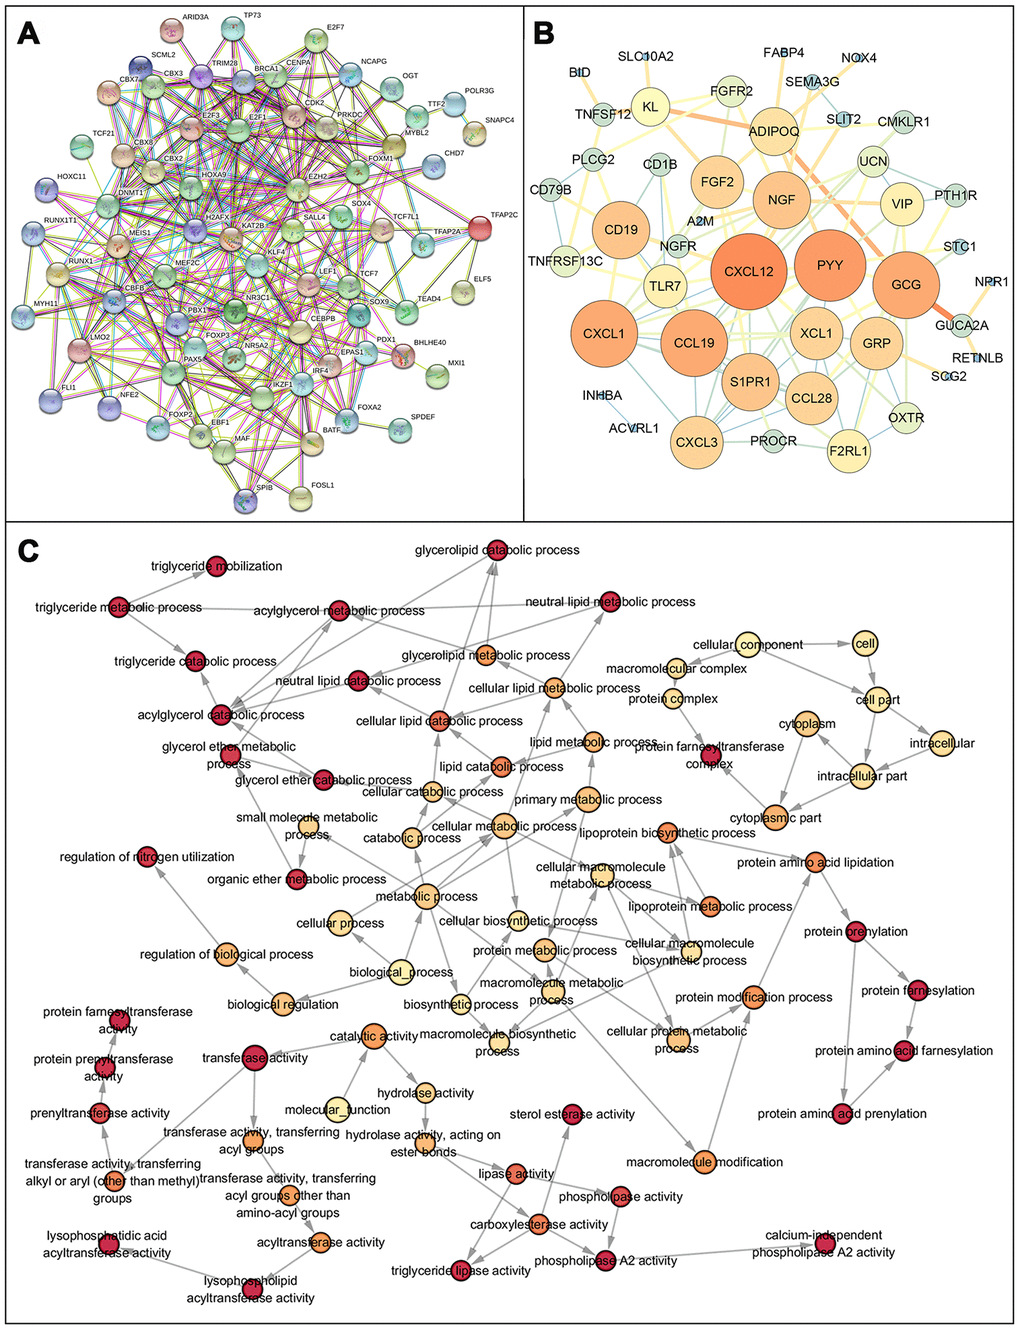 Protein protein interaction network and GO network of prognosis-related immune genes. (A) Protein-protein interaction network of prognosis-related immune genes, revealing their intrinsic connections. (B) The constructed PPIs in Cytoscape, with the size of the nodes showing the degree of connectivity of the immune genes, reveal the hub genes in the network. (C) Gene ontology network of prognosis-related immune genes. The color shade of the node represents the p-value, darker colors indicate smaller P values. P 